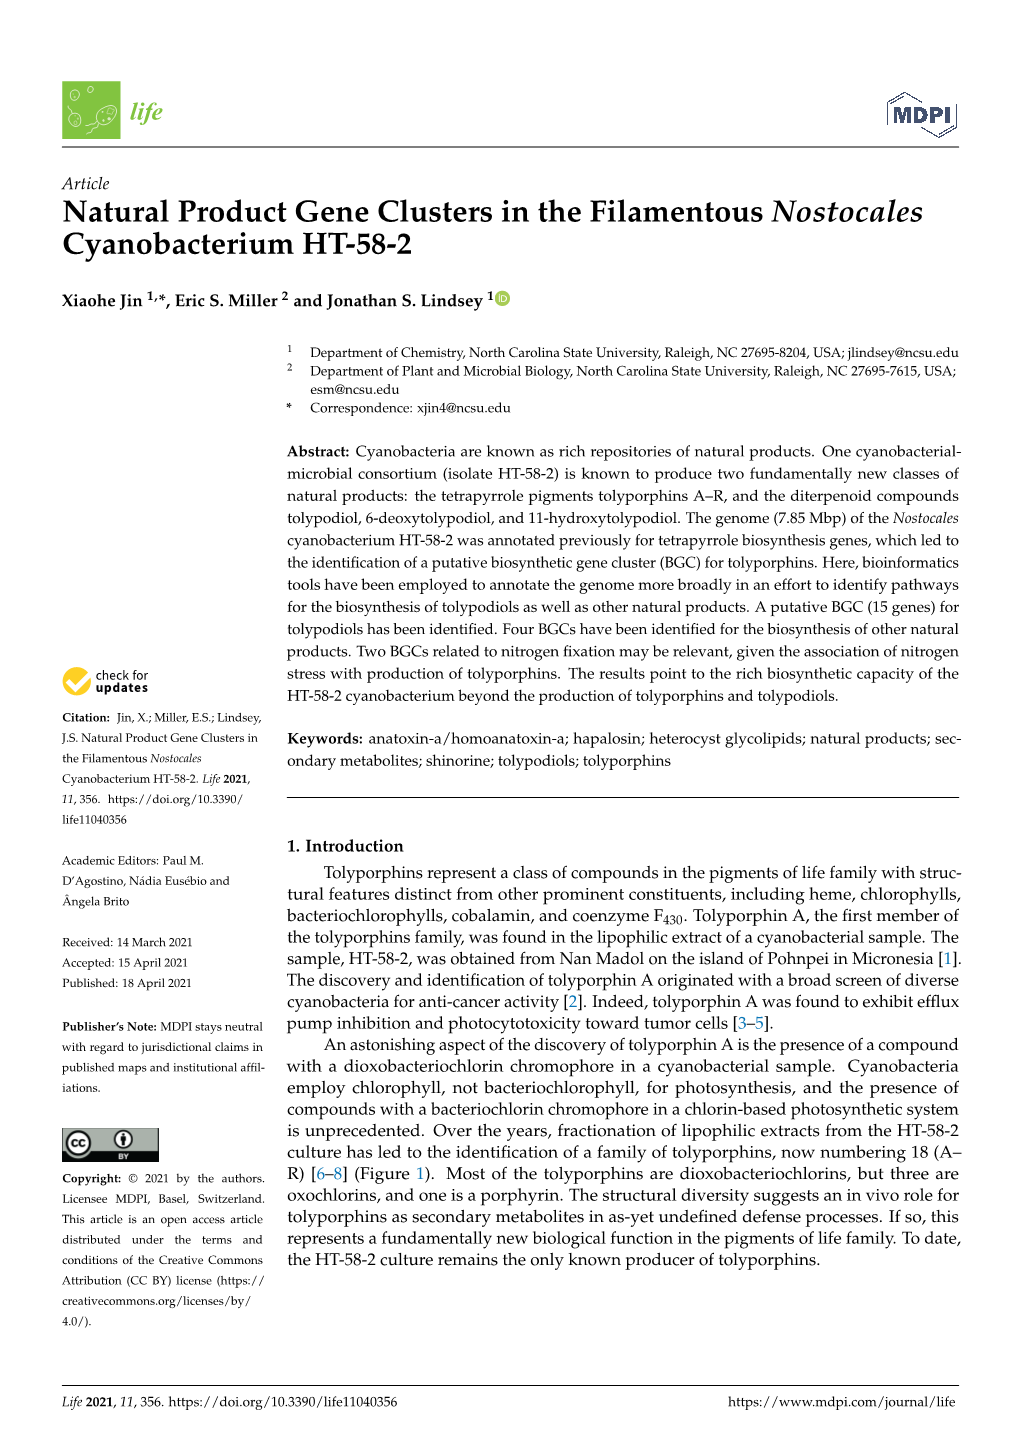 Natural Product Gene Clusters in the Filamentous Nostocales Cyanobacterium HT-58-2